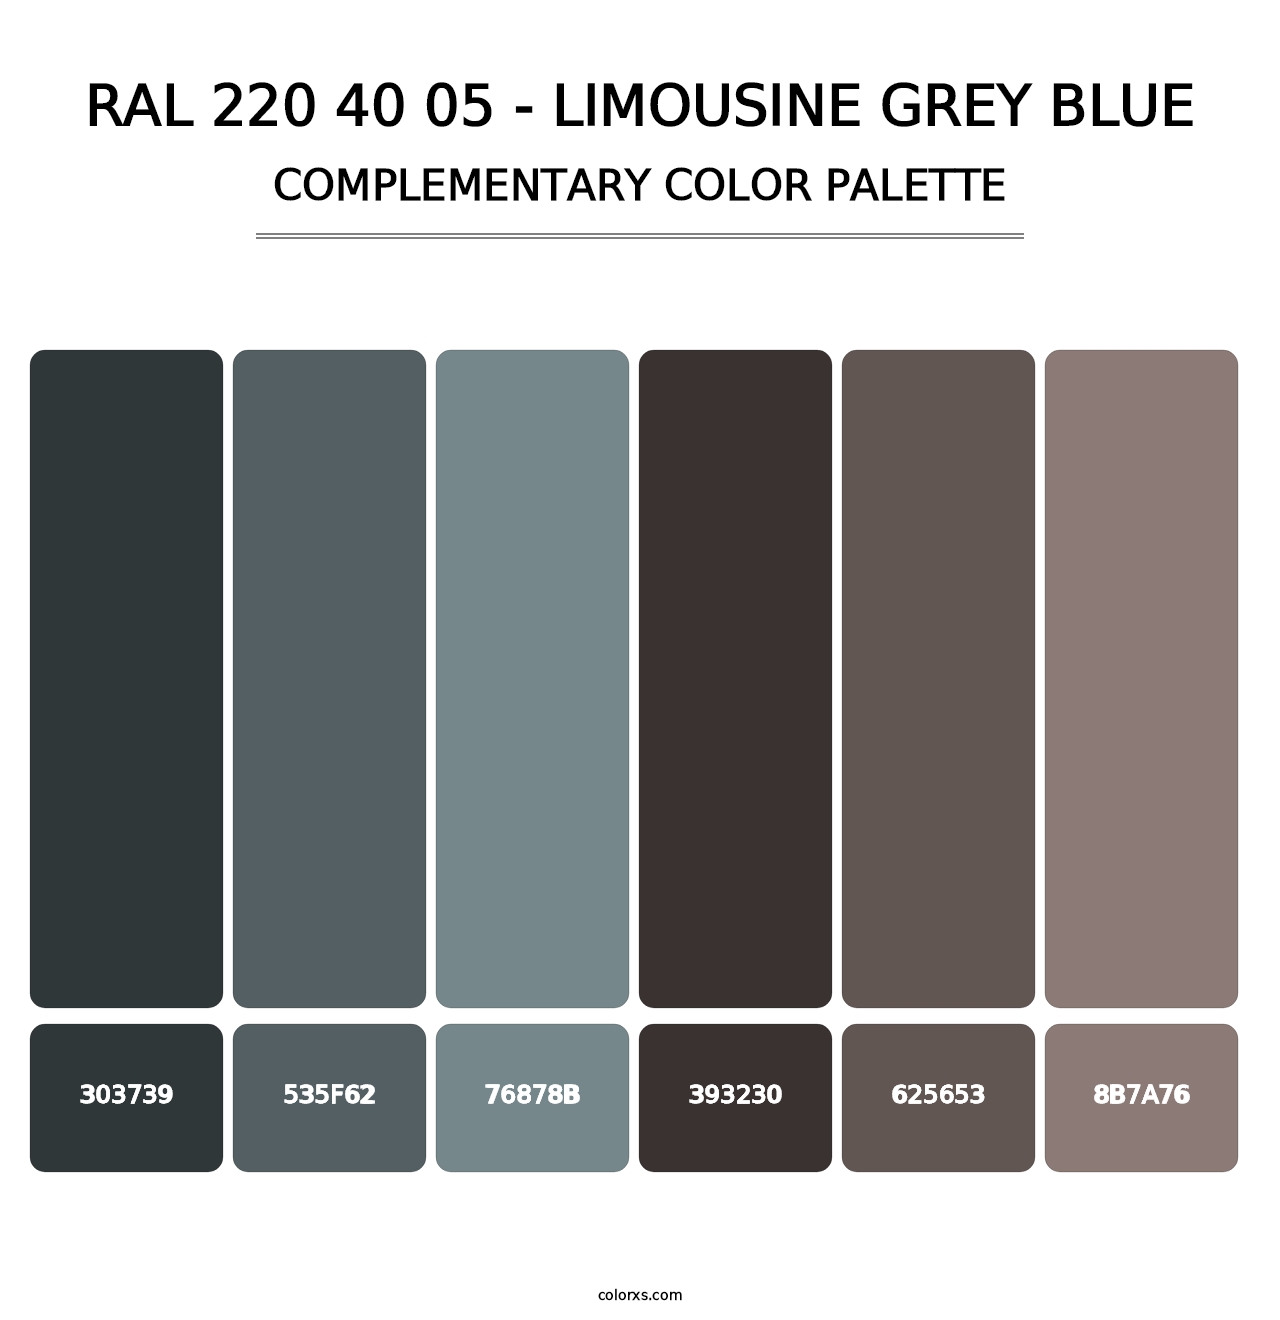 RAL 220 40 05 - Limousine Grey Blue - Complementary Color Palette